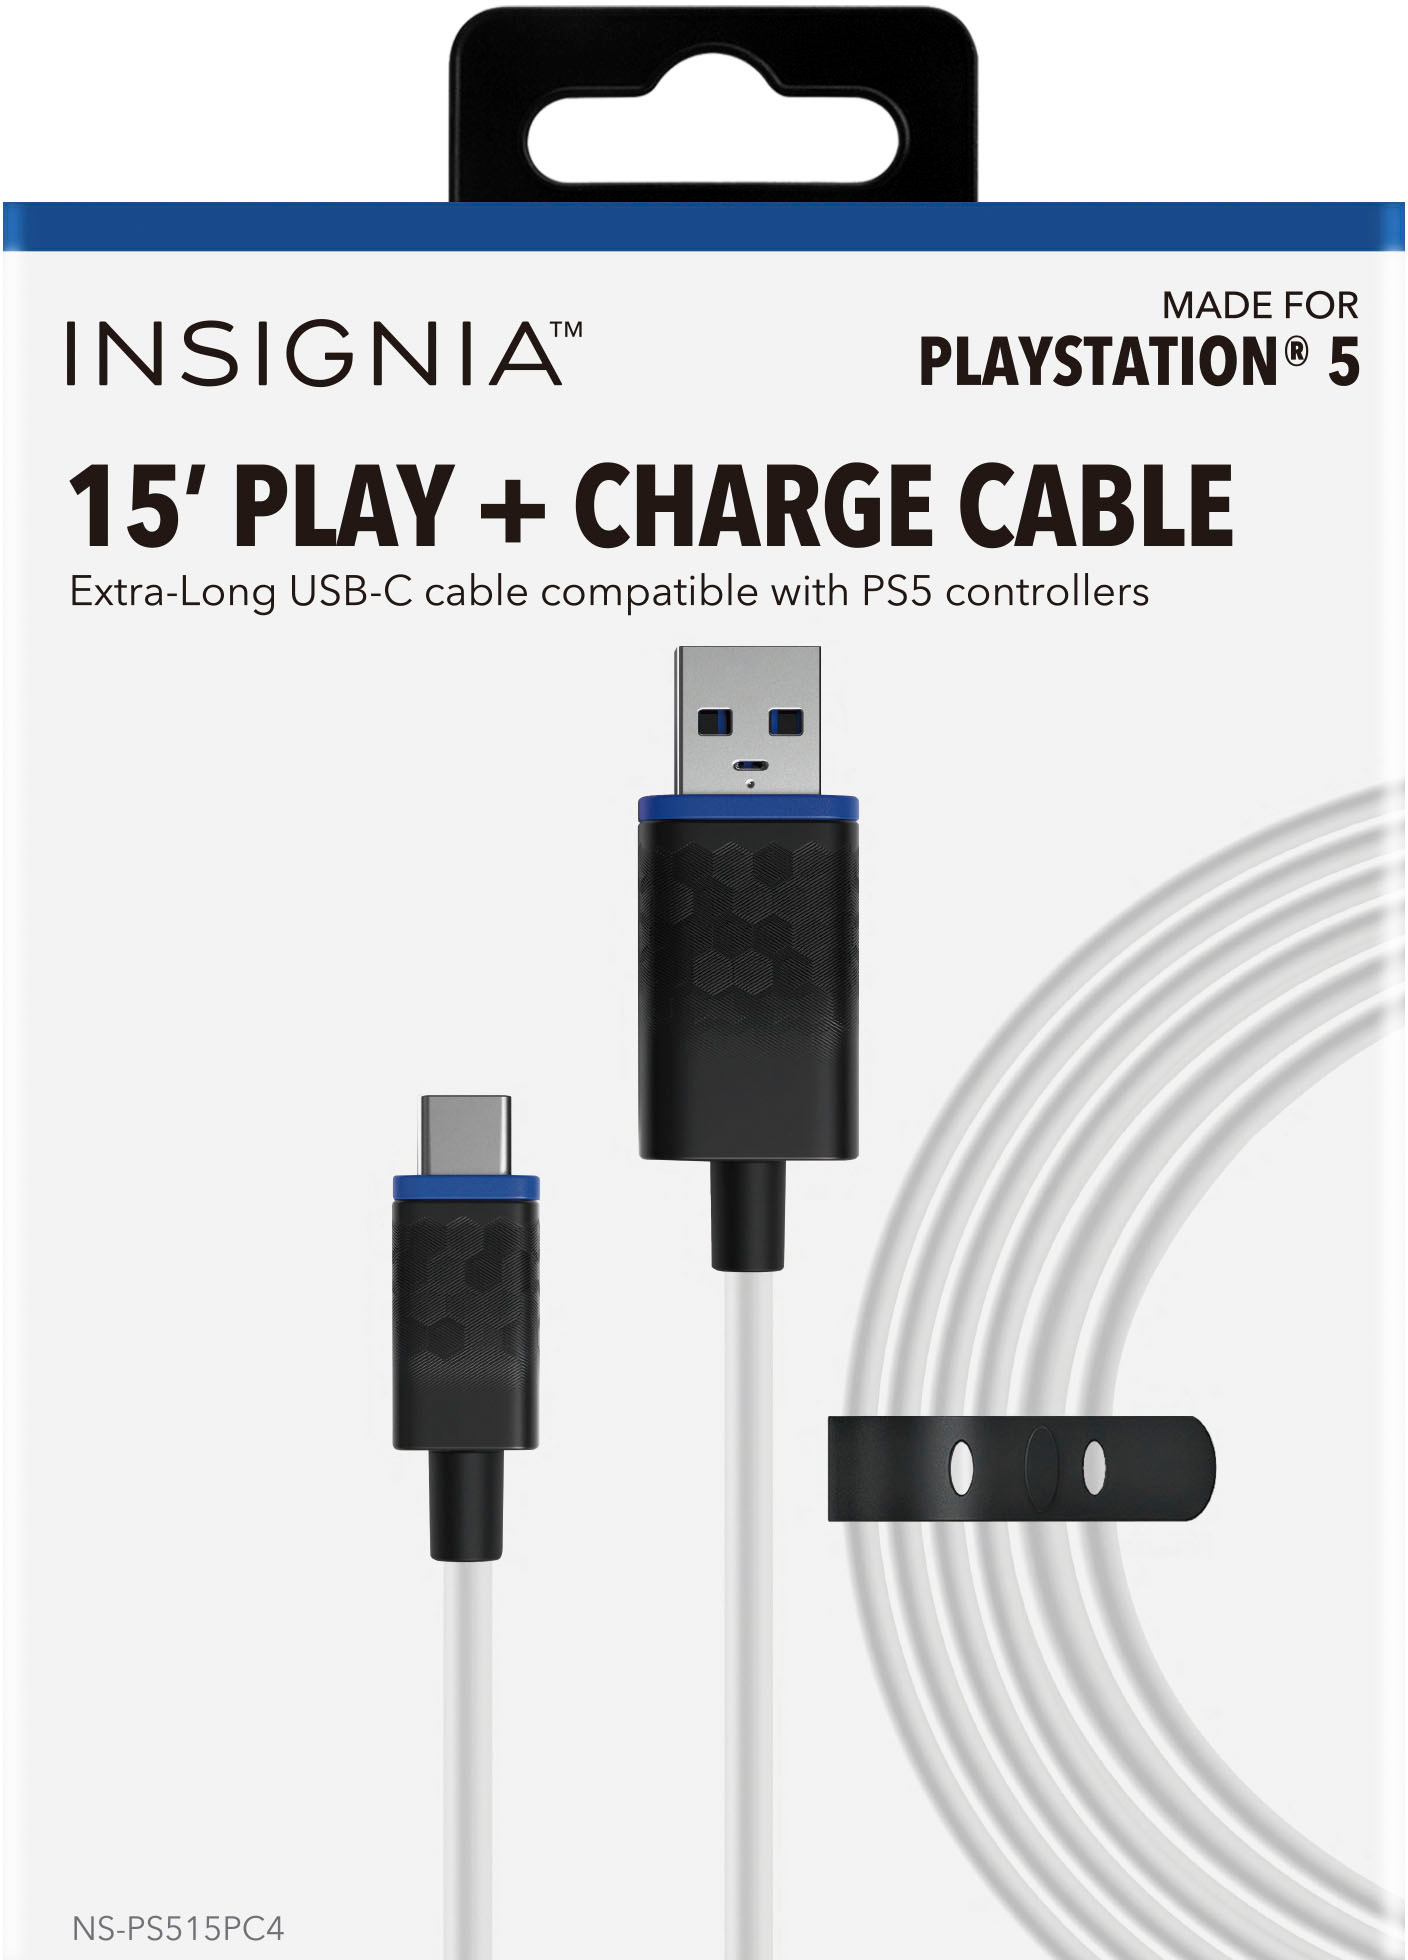 Best Buy: Insignia™ USB 4 Port Expander for PlayStation 5 Black NS-PS5MH4